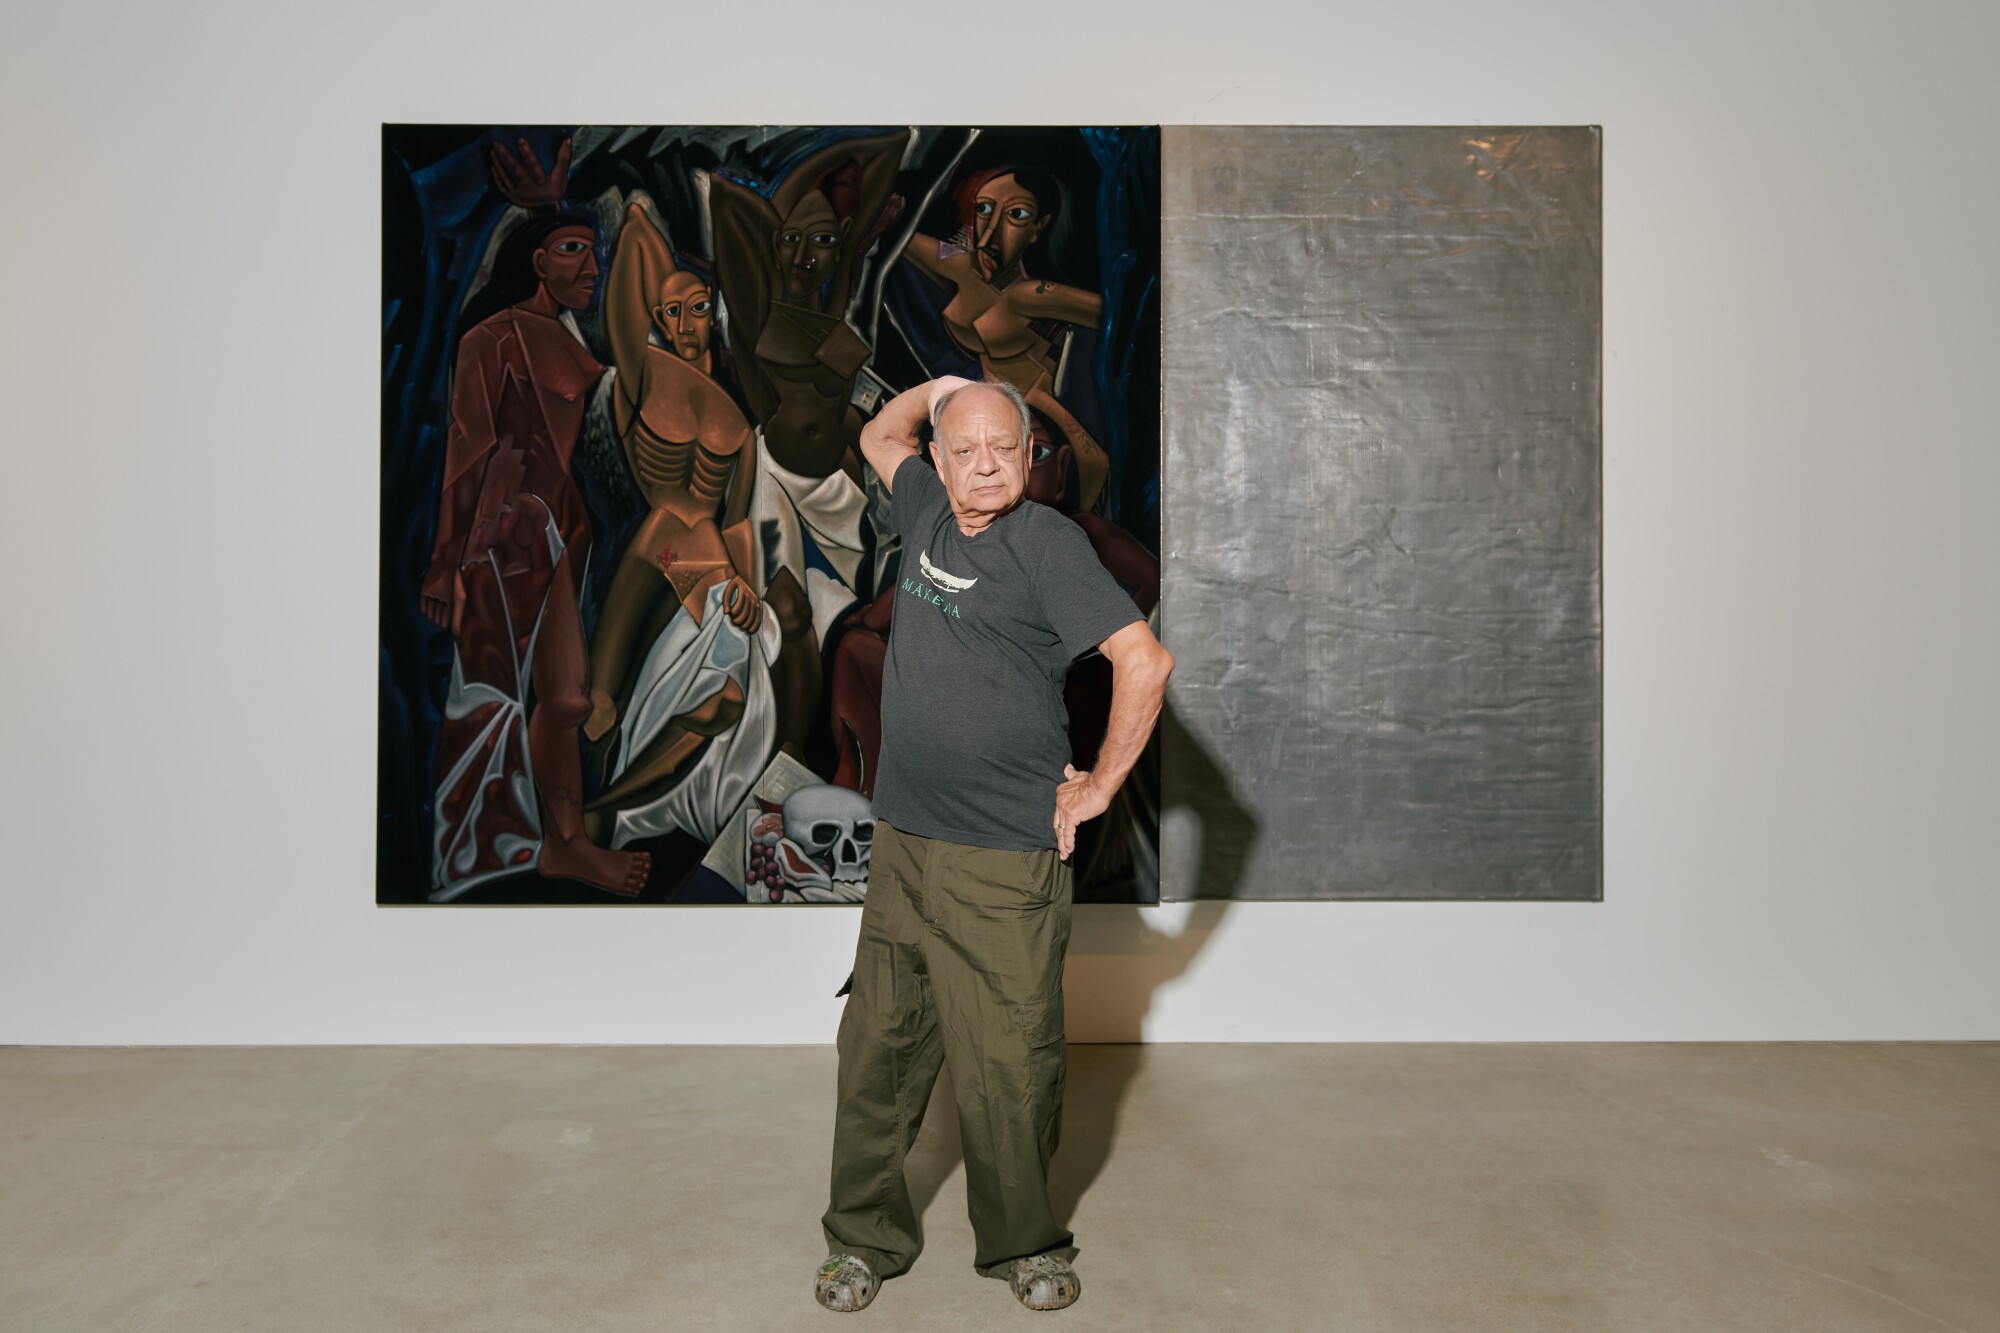 Cheech Marin in front of Benito Huerta's painting "Exile Off Main Street," 1999